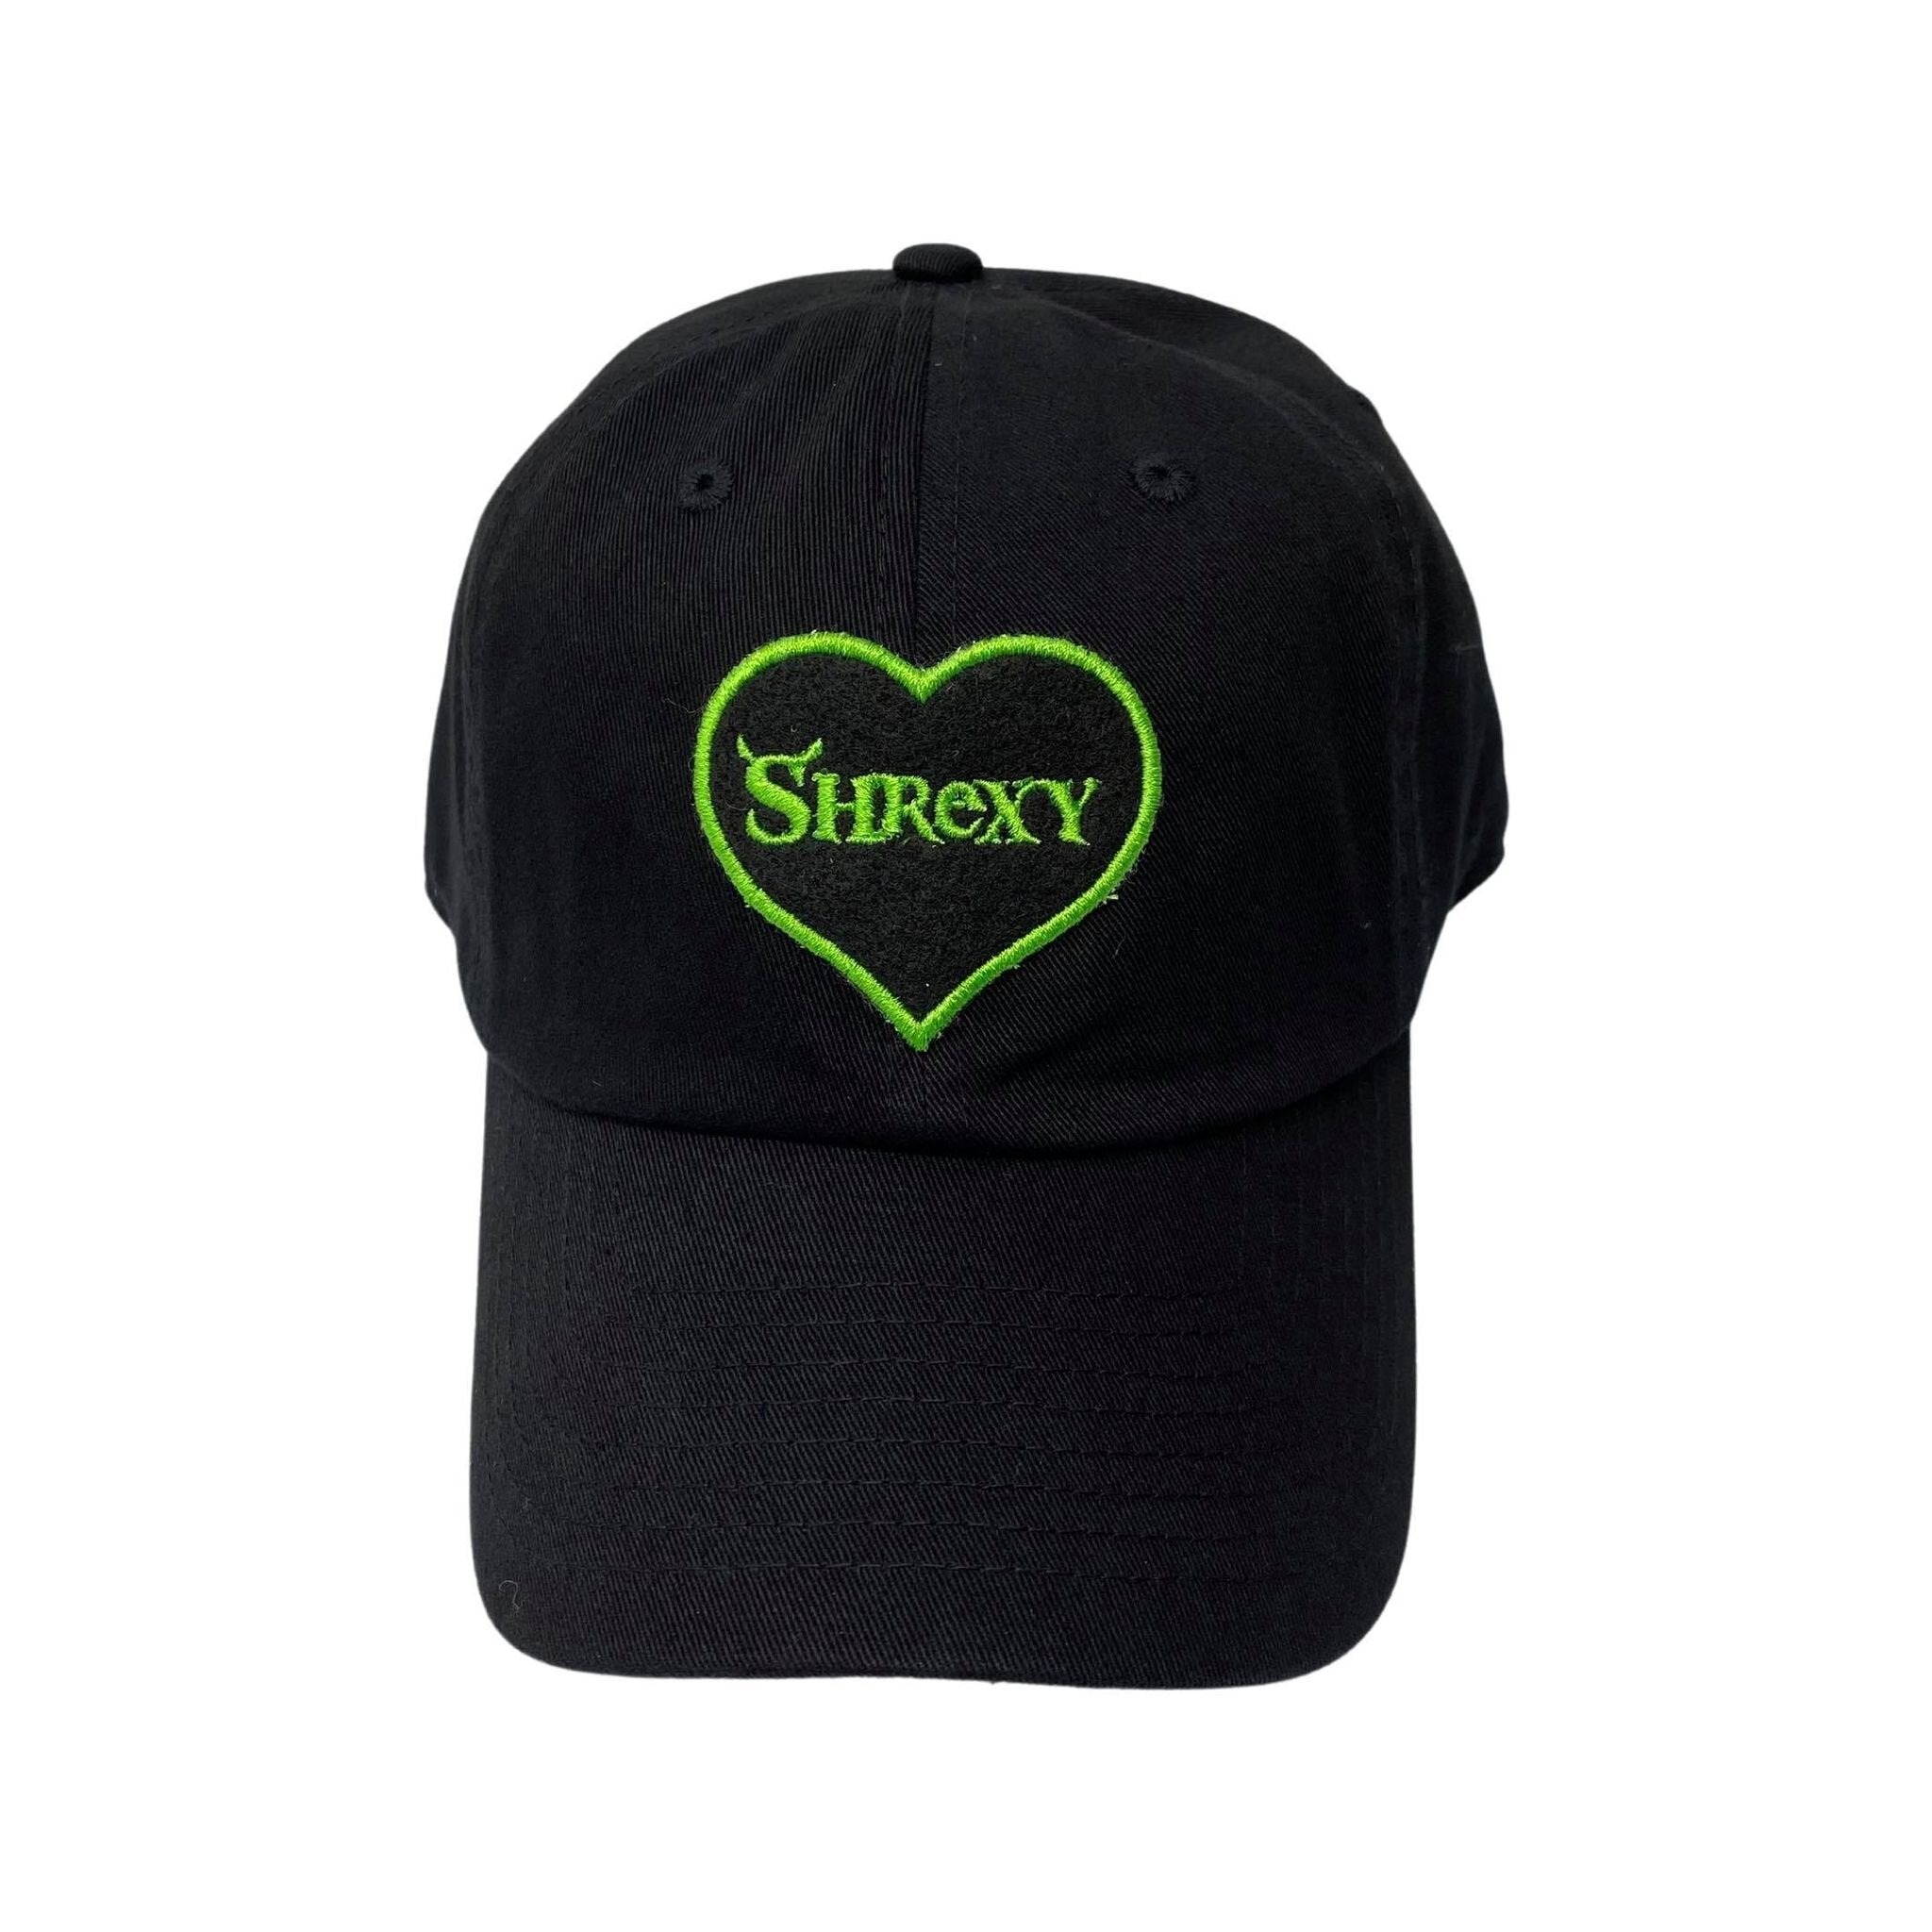 Shrexy Embroidered Patch Dad Hat - IncredibleGood Inc